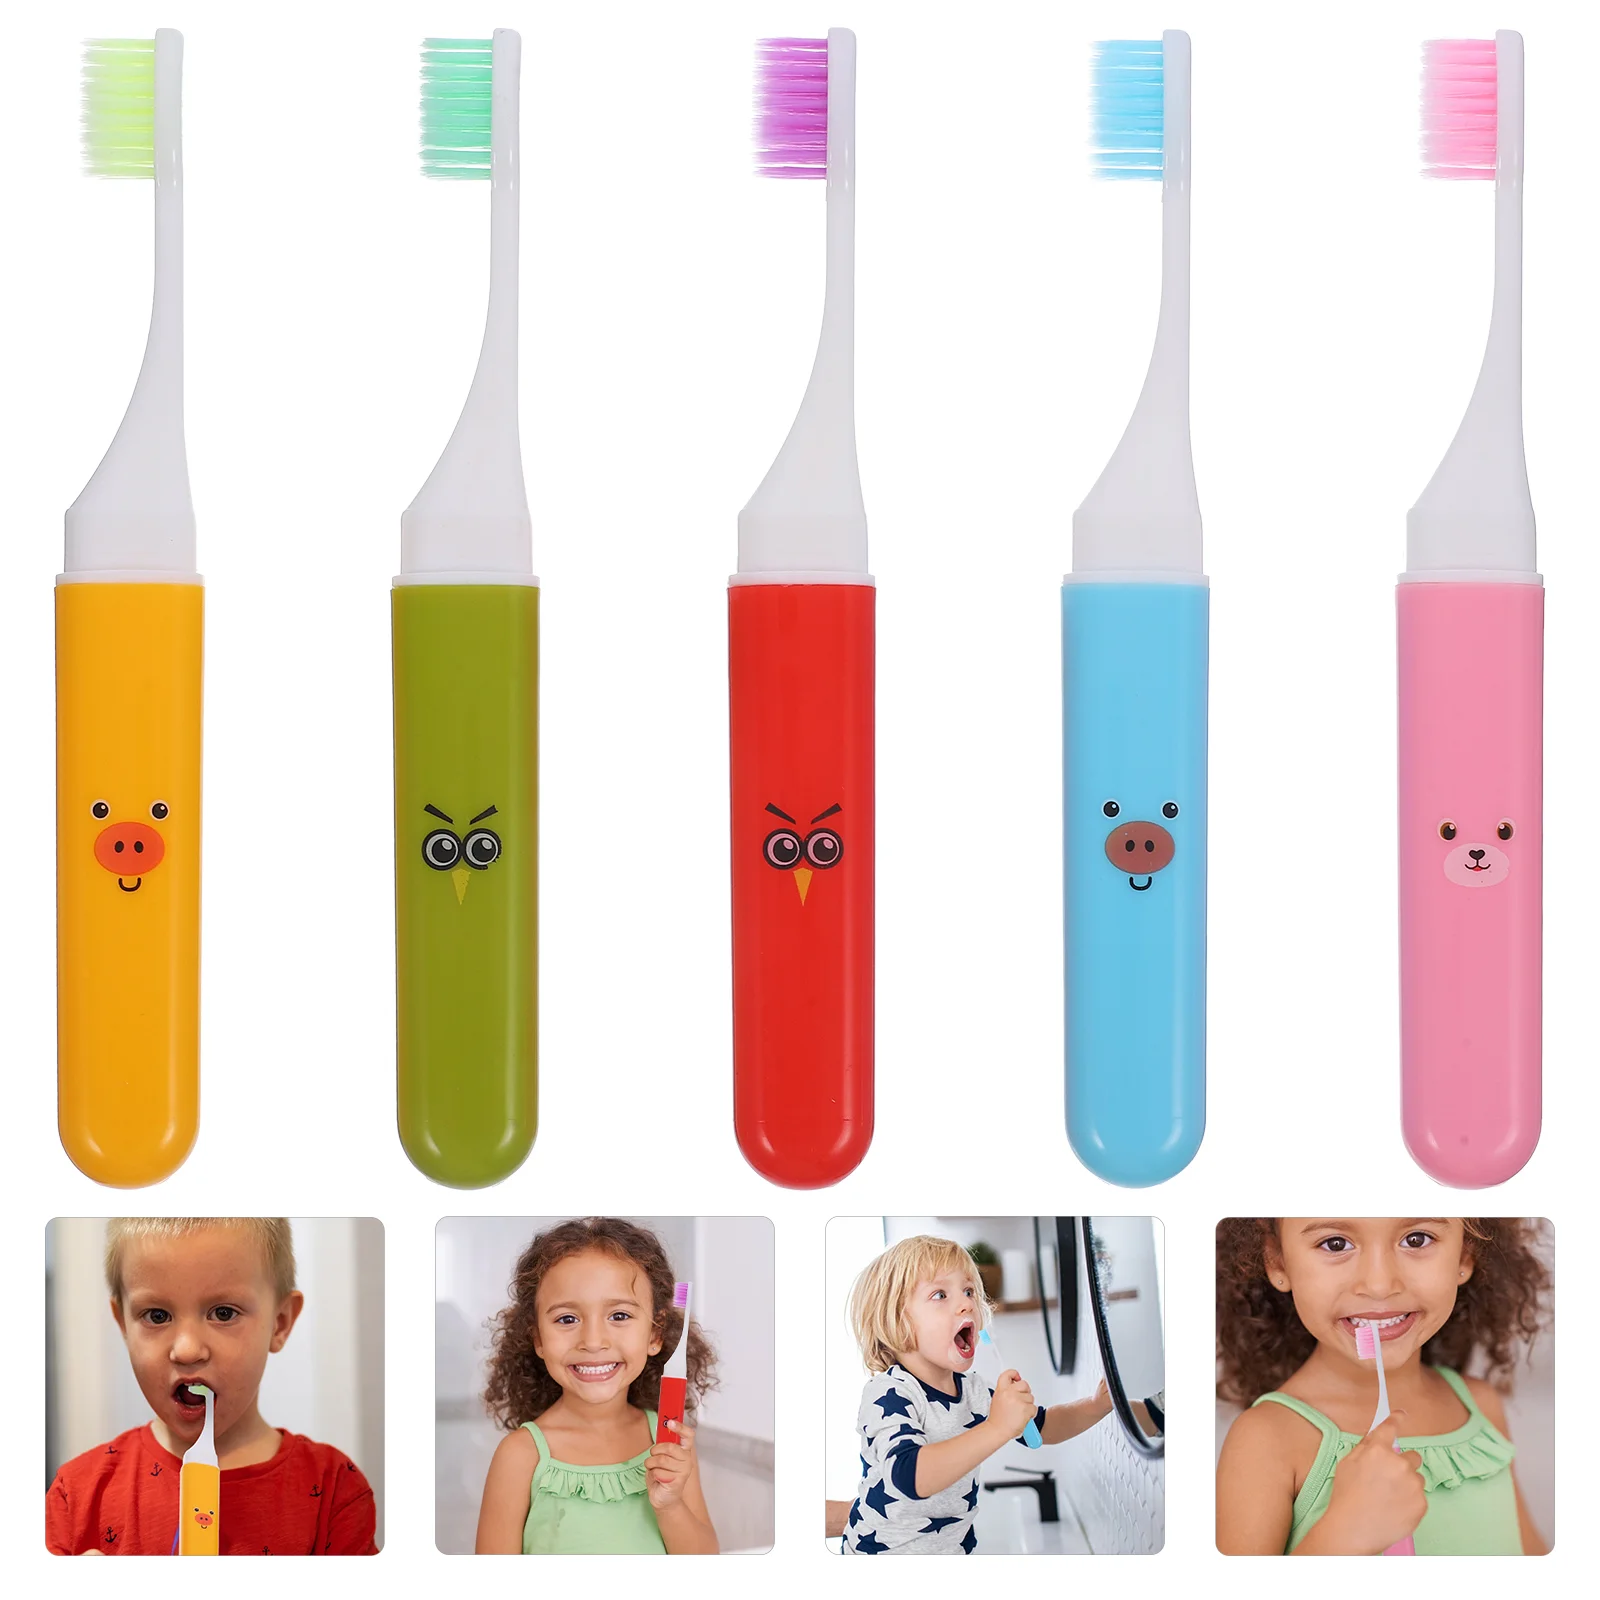 

5 Pcs Children's Folding Toothbrush Toothbrushes Kids Travel Daily Portable Camping Plastic Foldable Professional